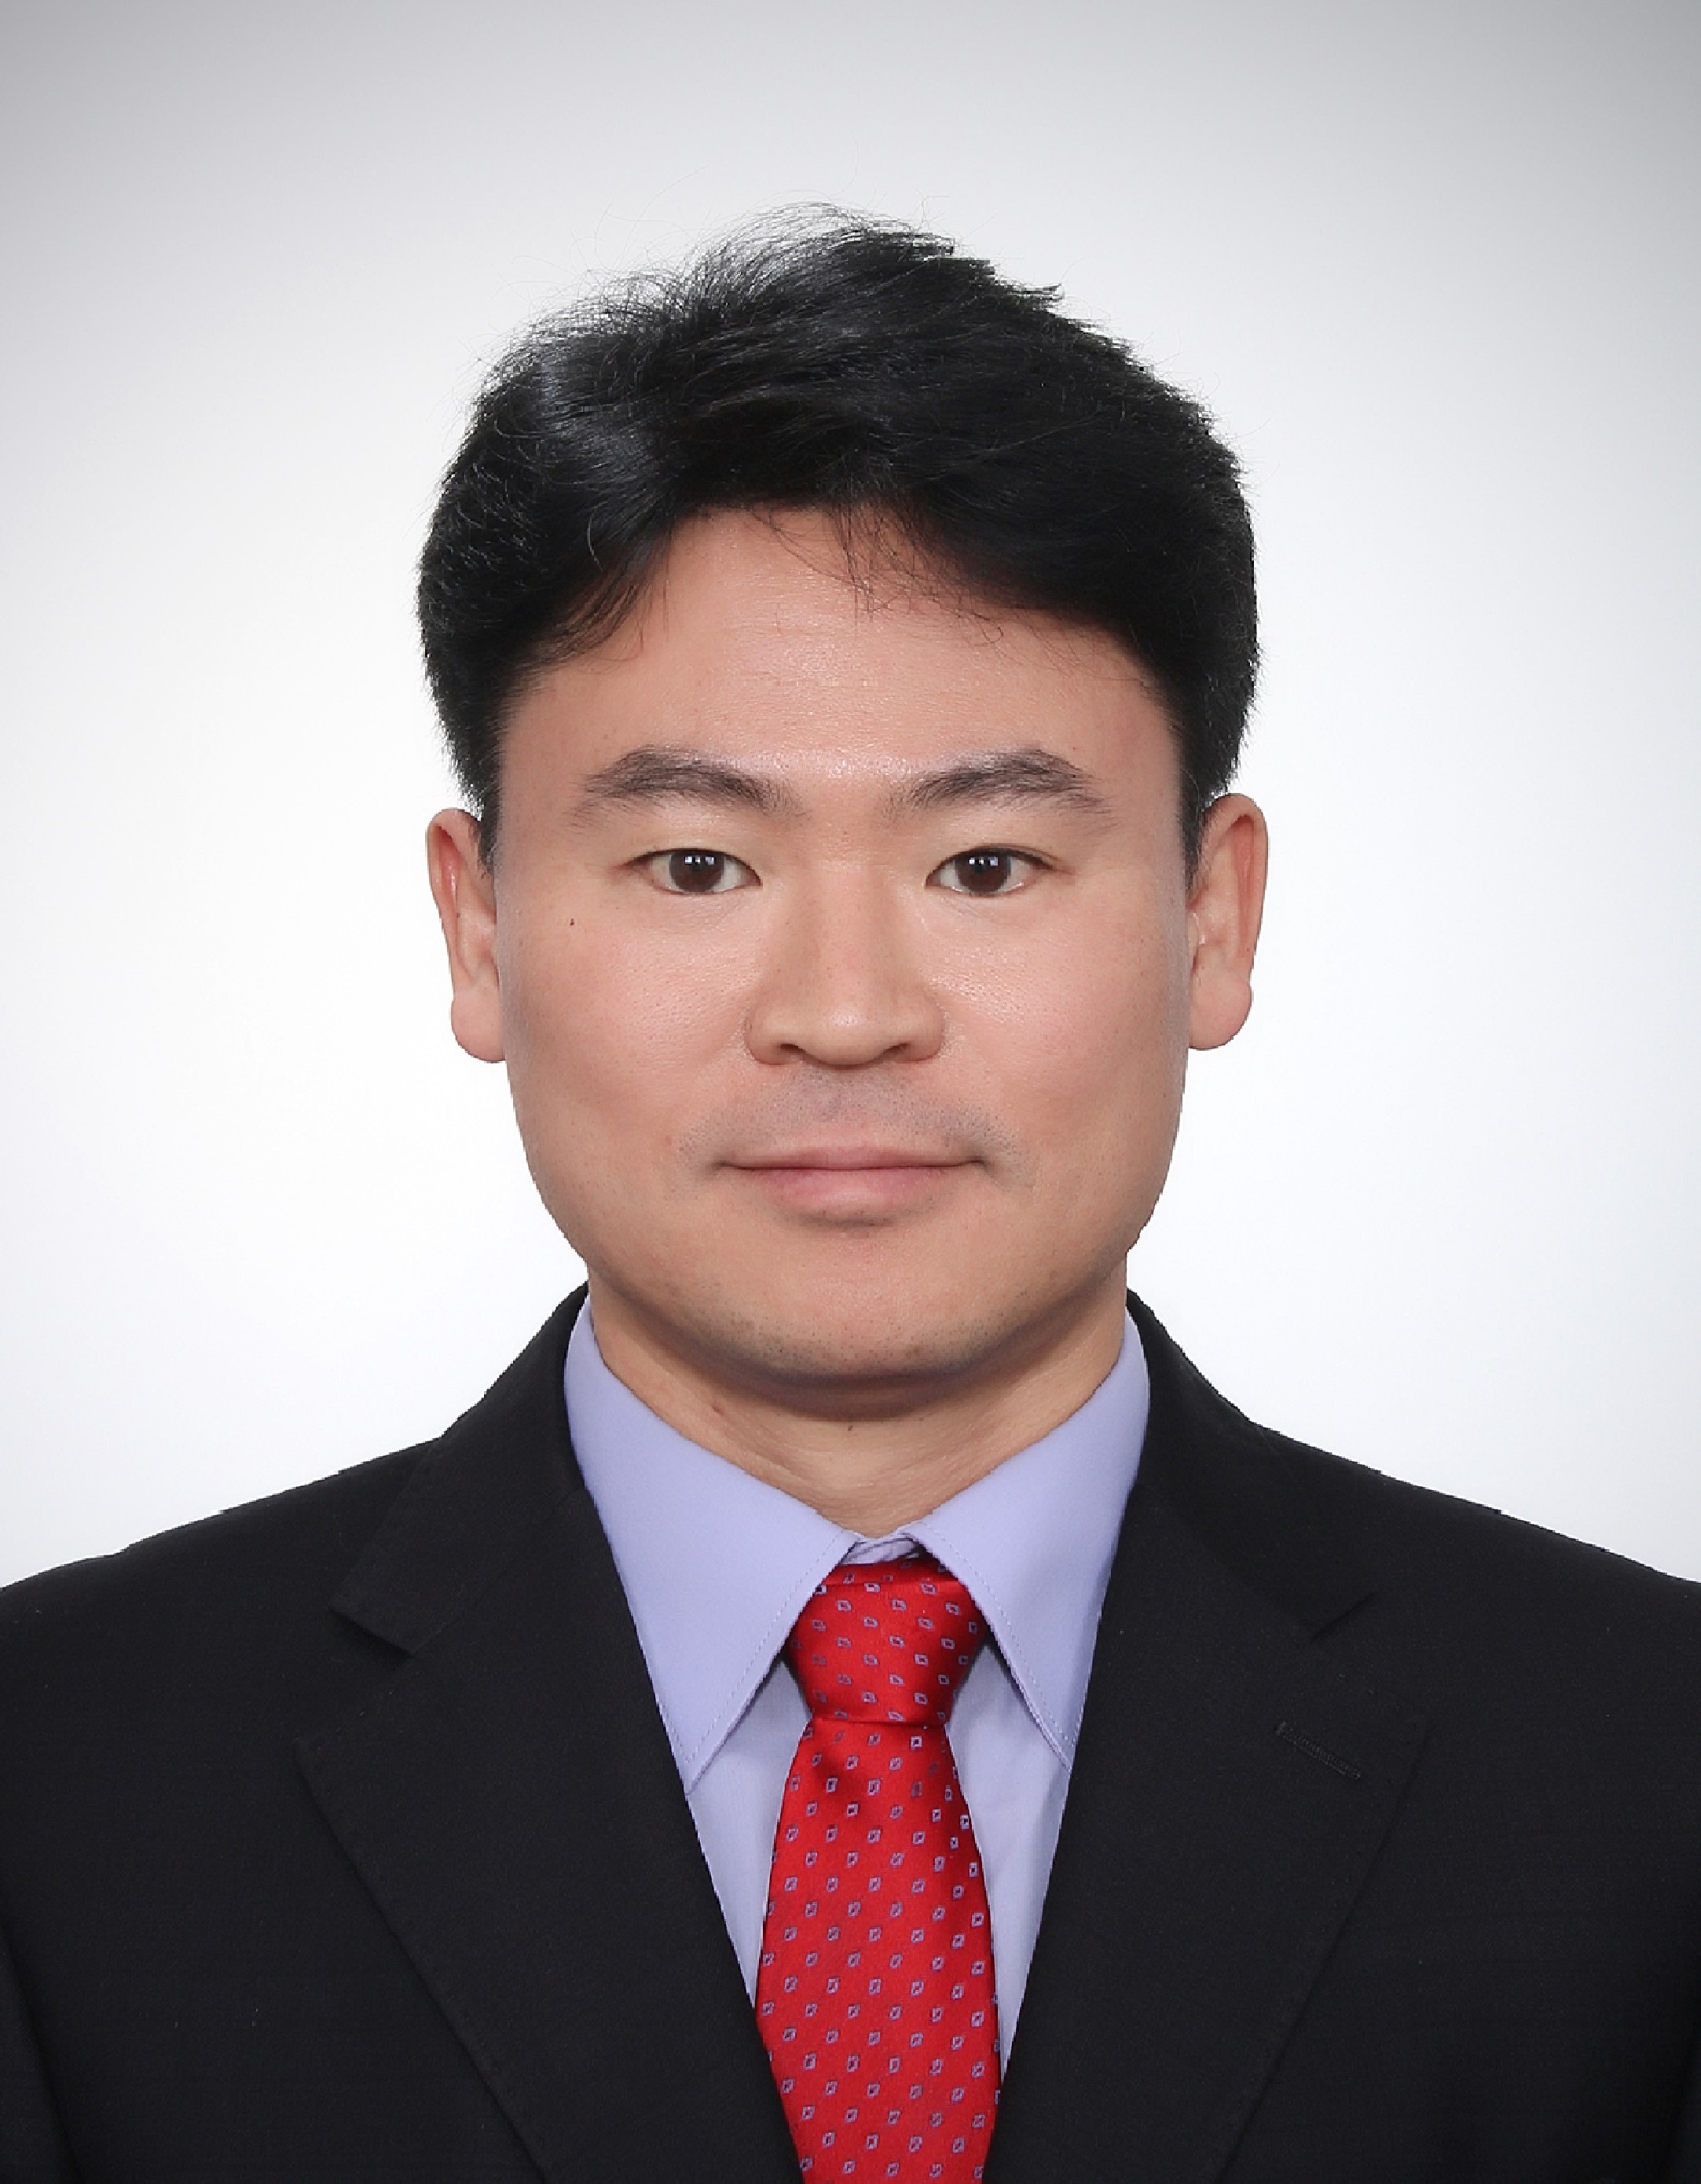 Professor Joon Ha Kim appointed as a member of the Presidential Committee on Policy Planning 이미지